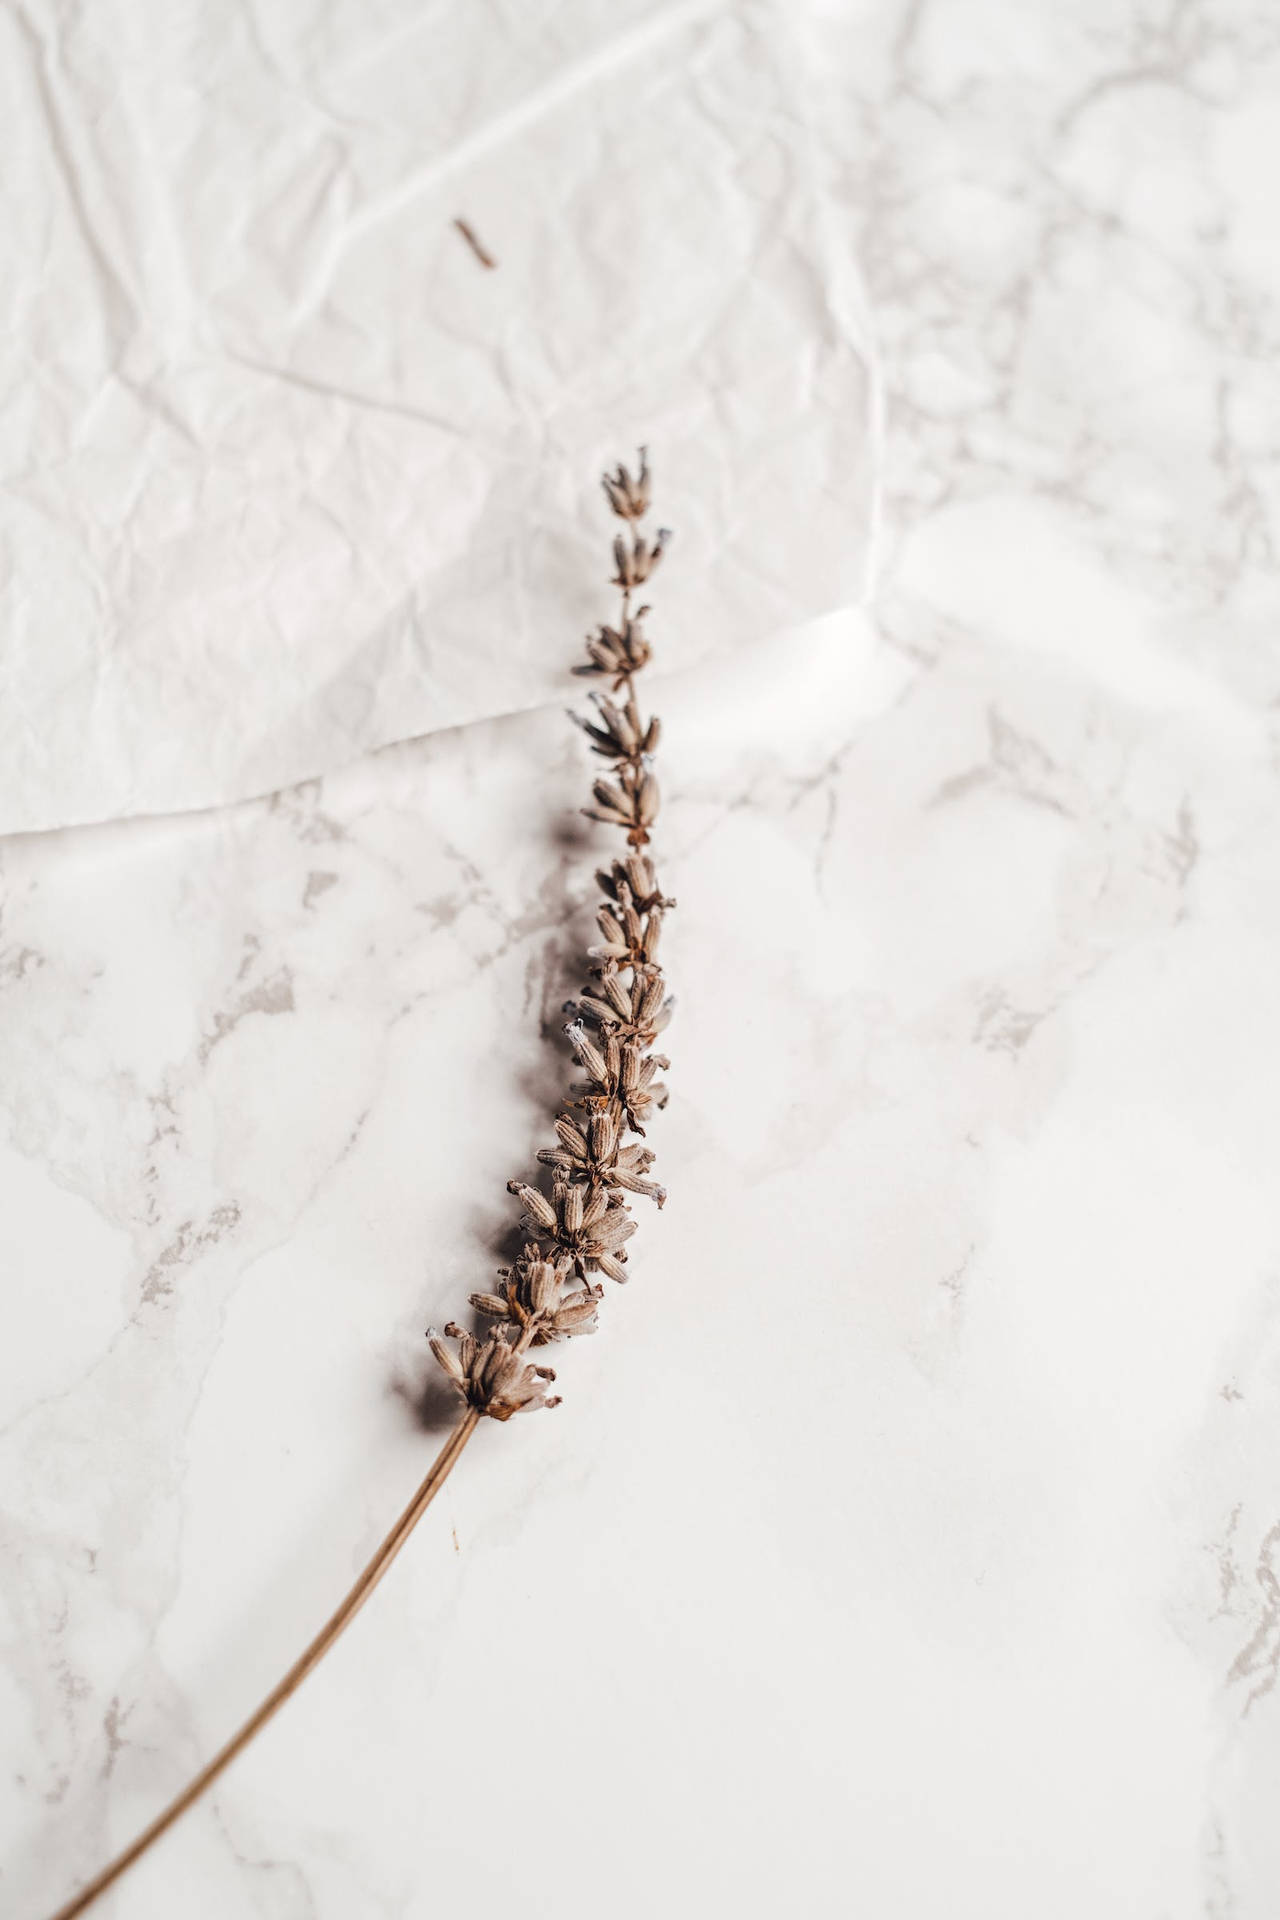 Dried Flower On Aesthetic Marble Surface Background